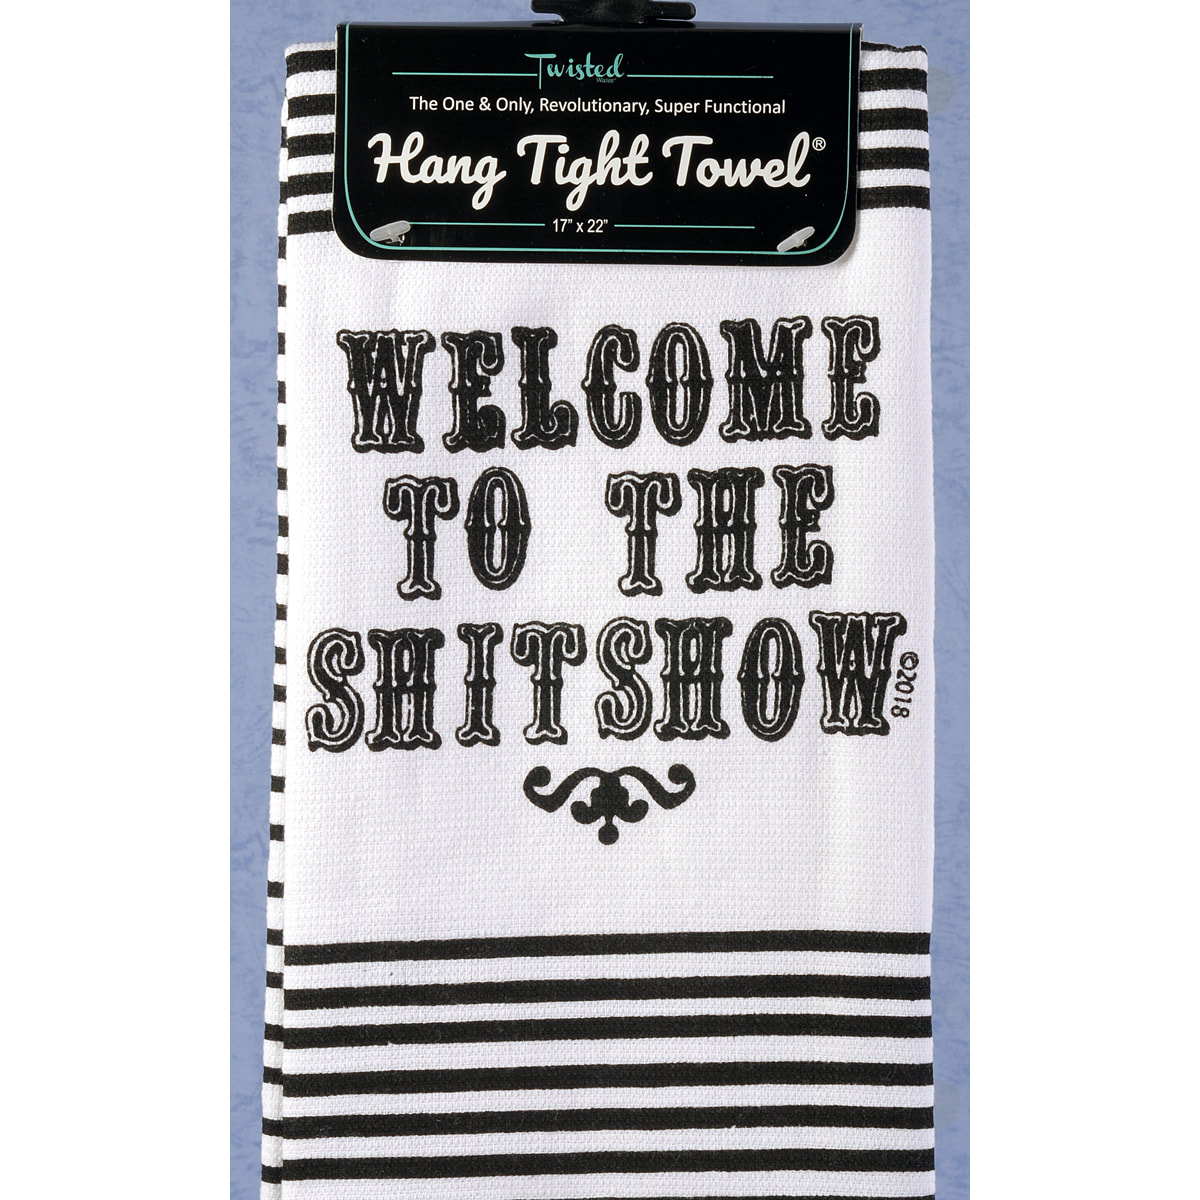 Buy the Twisted Wares Hang Tight Boobs Twisted Terry Towel